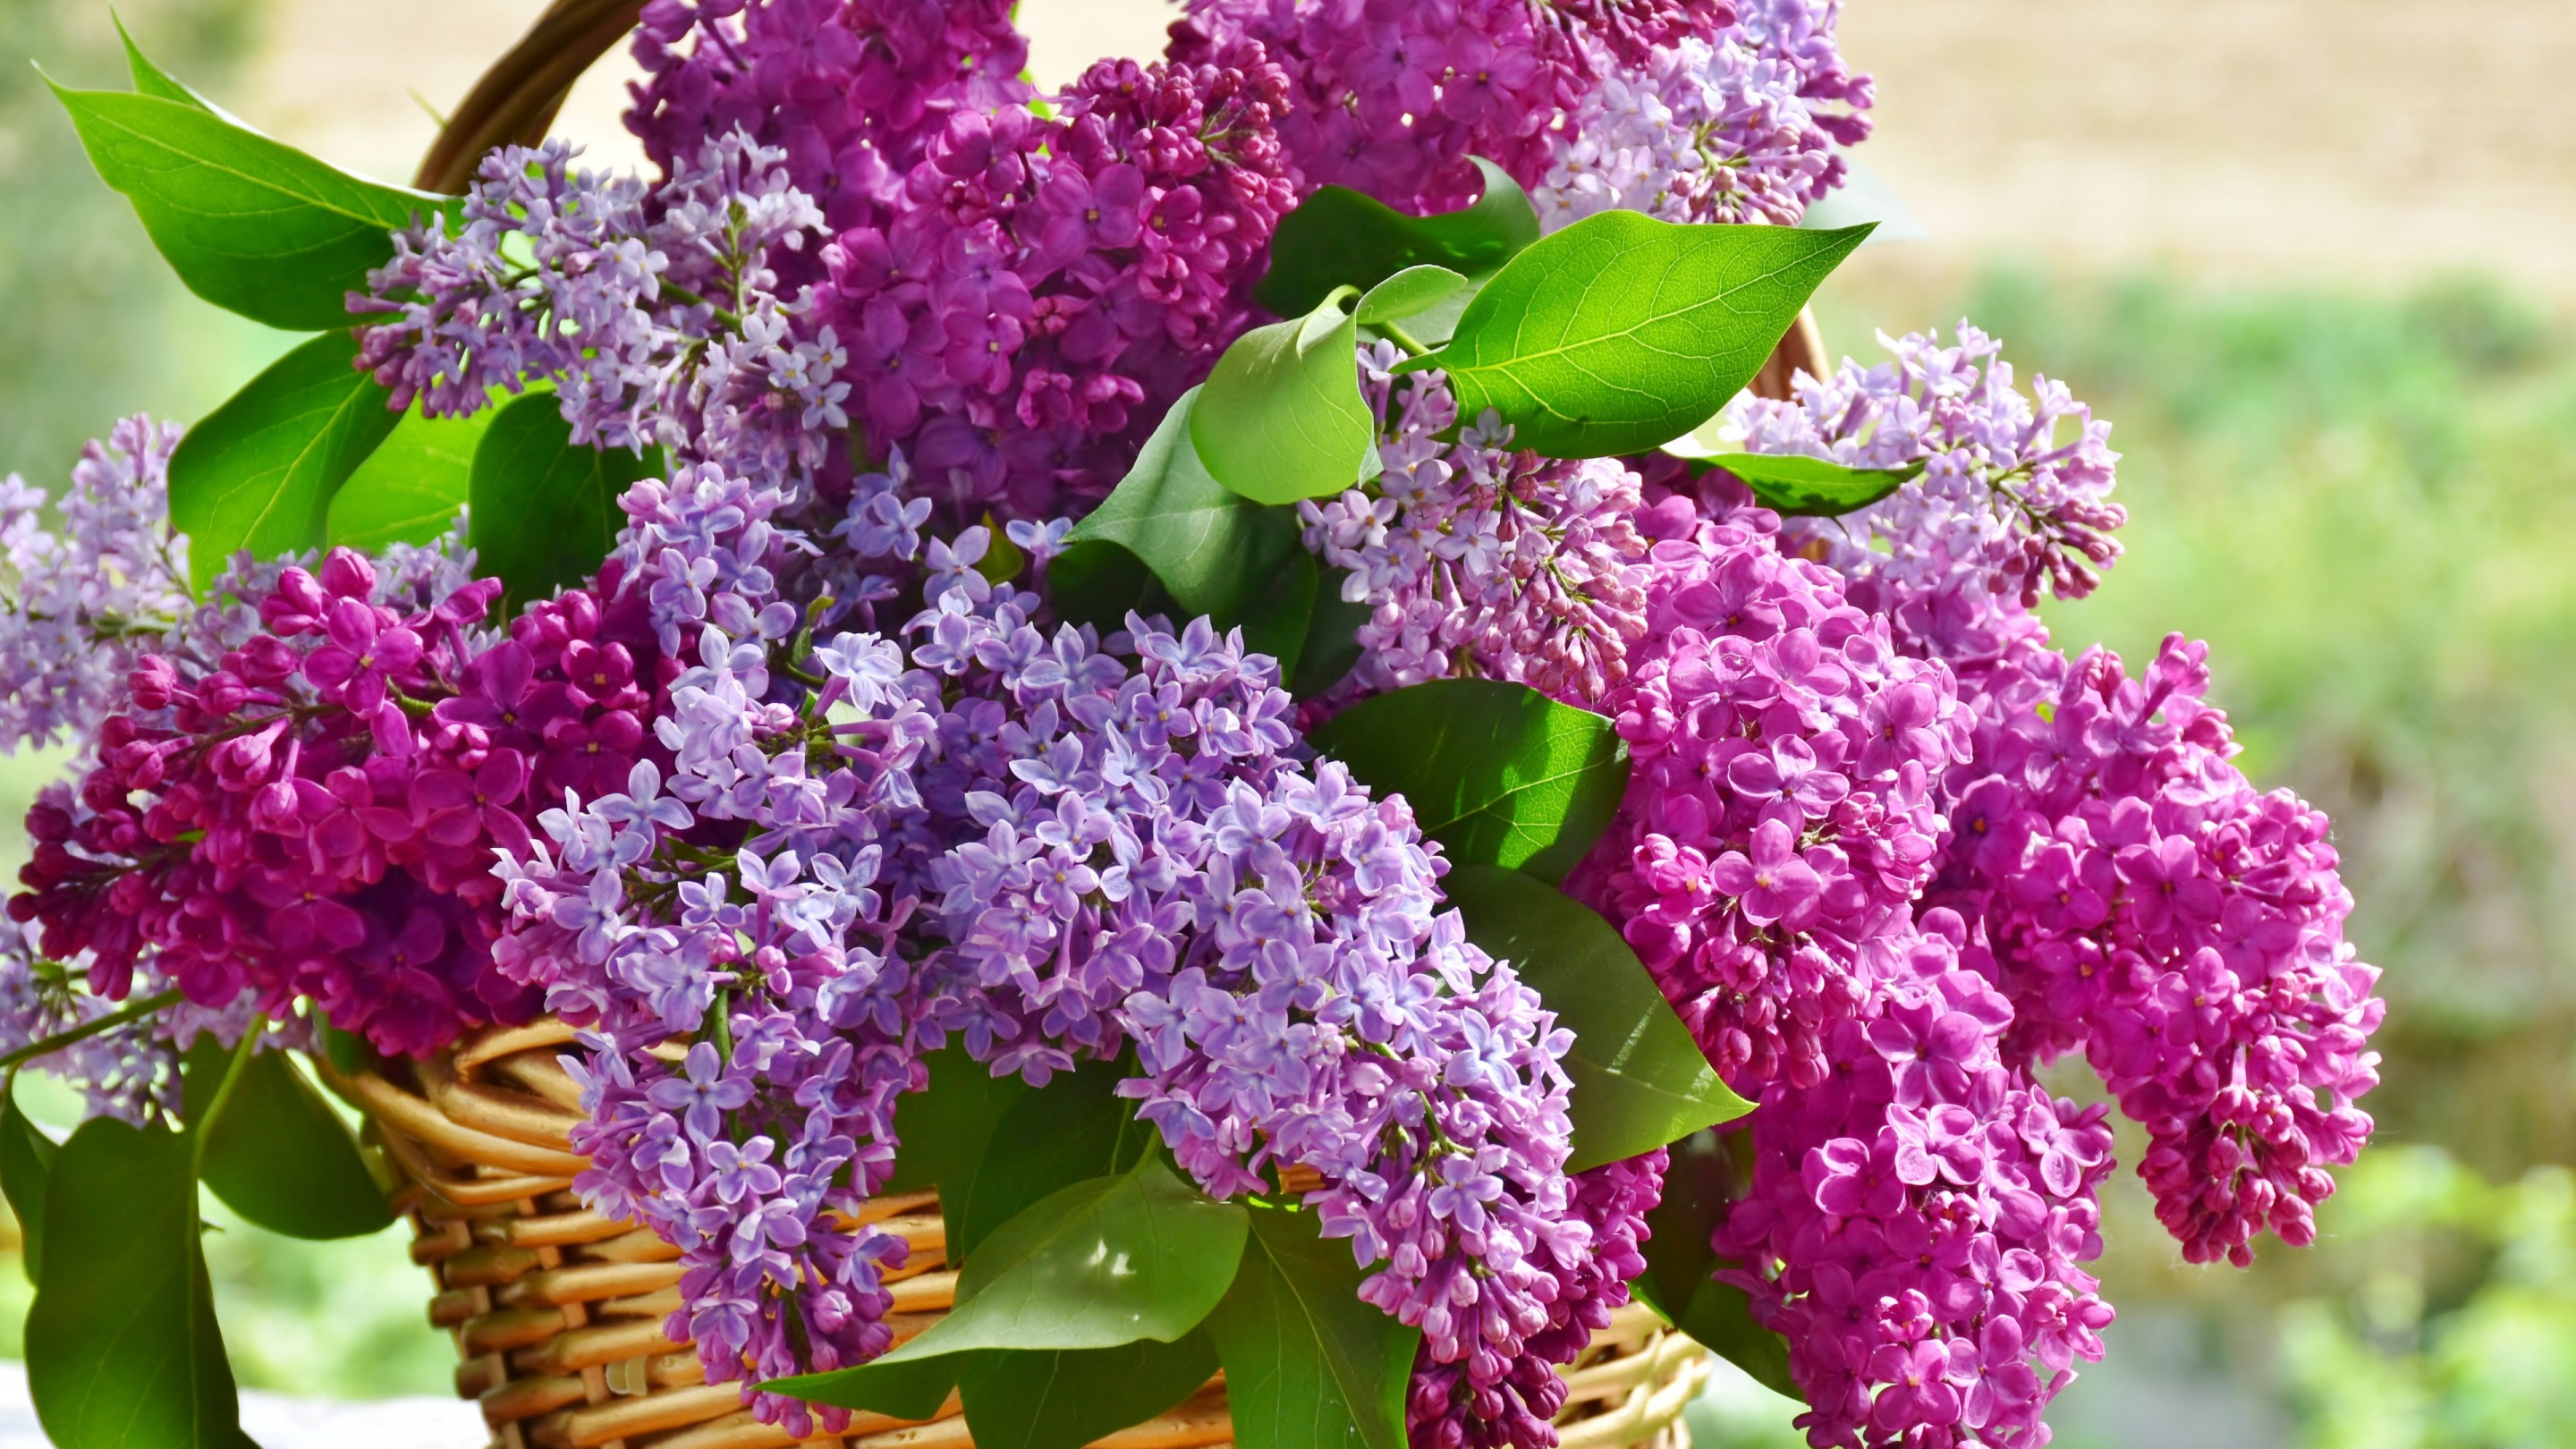 Best basket with lilac flowers wallpaper 2880x1620